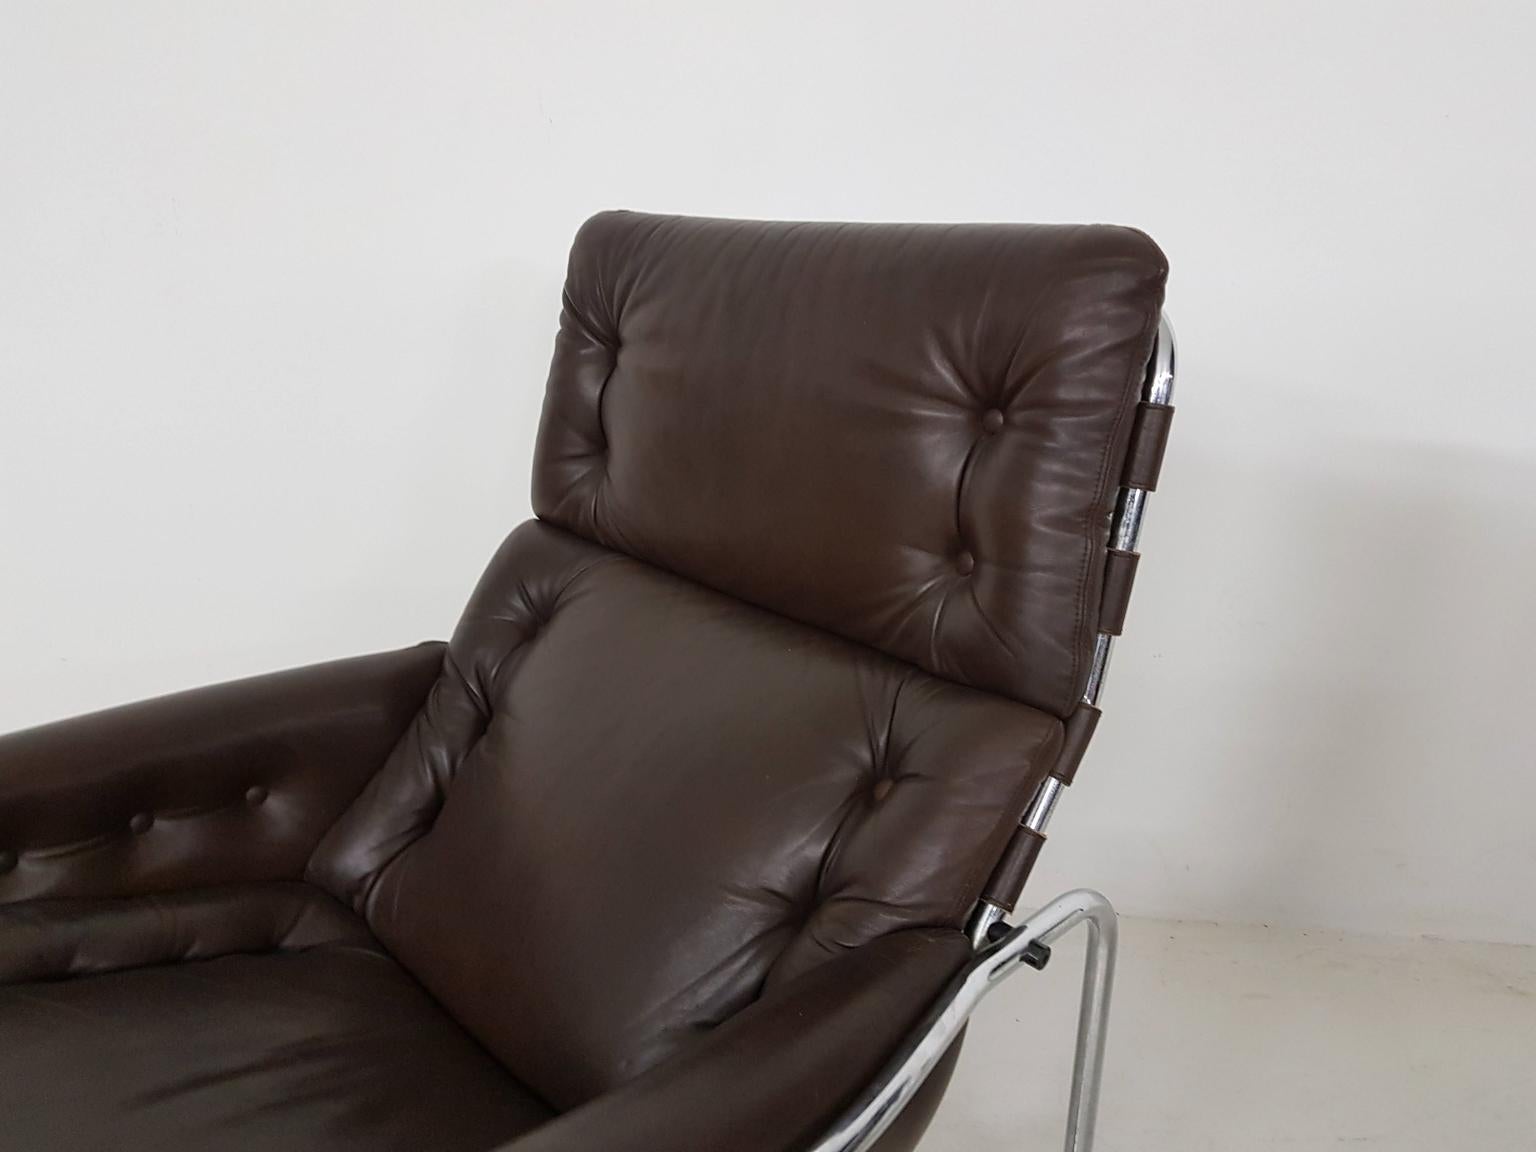 1x Nagoya Brown Leather Lounge Chair by Martin Visser for ’t Spectrum, Dutch '69 6